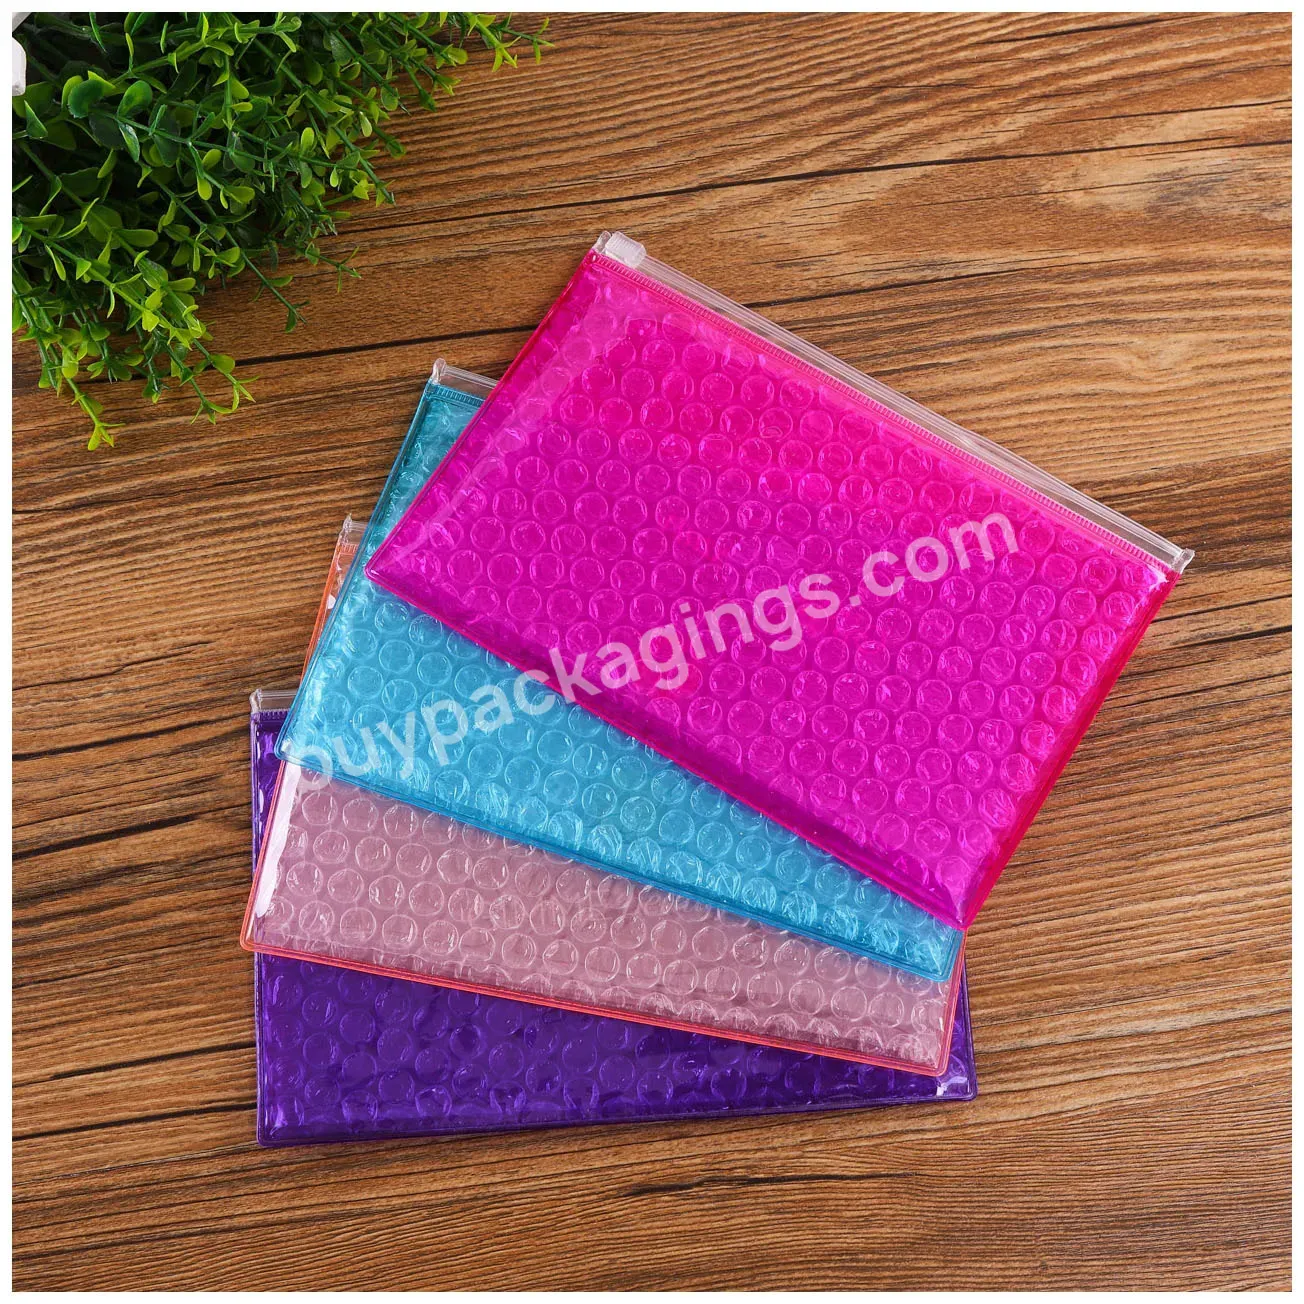 Reusable Air Wrap Pouch Jewelry Shipping Waterproof Colored Padded Envelope Bag Packaging Ziplock Pink Bubble Mailers - Buy Pink Bubble Mailers,Bubble Bag Packaging Ziplock,Bubble Mailer Padded Envelope.